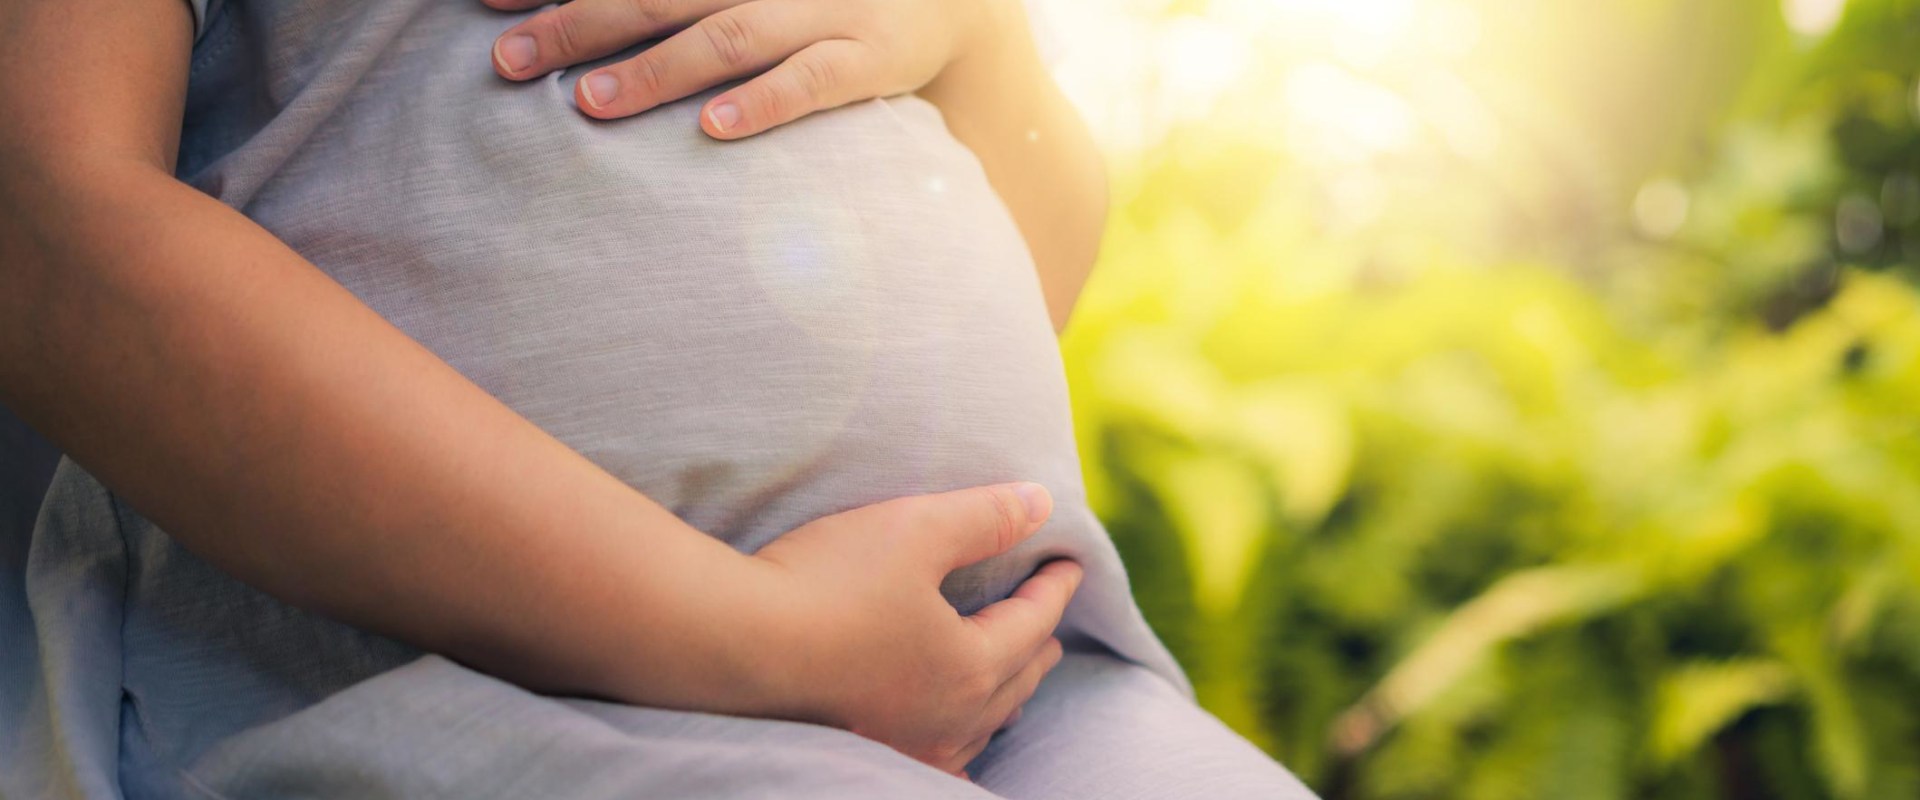 Is it safe to take vitamin d supplements while pregnant?